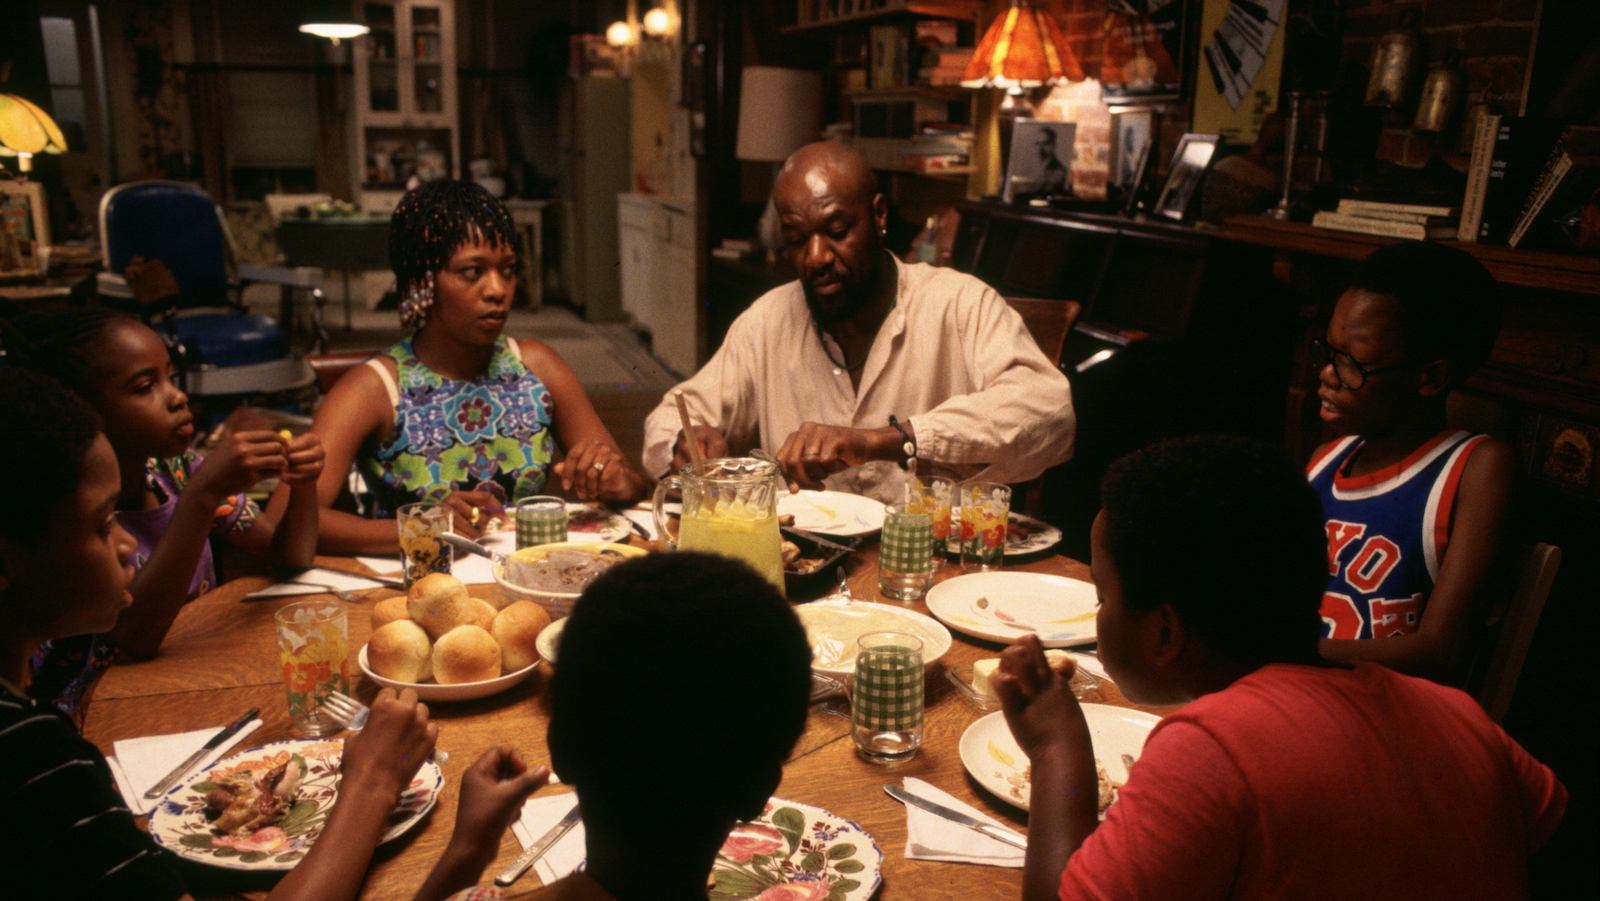 A family sits around a dinner table, with the parents in the back center of the frame